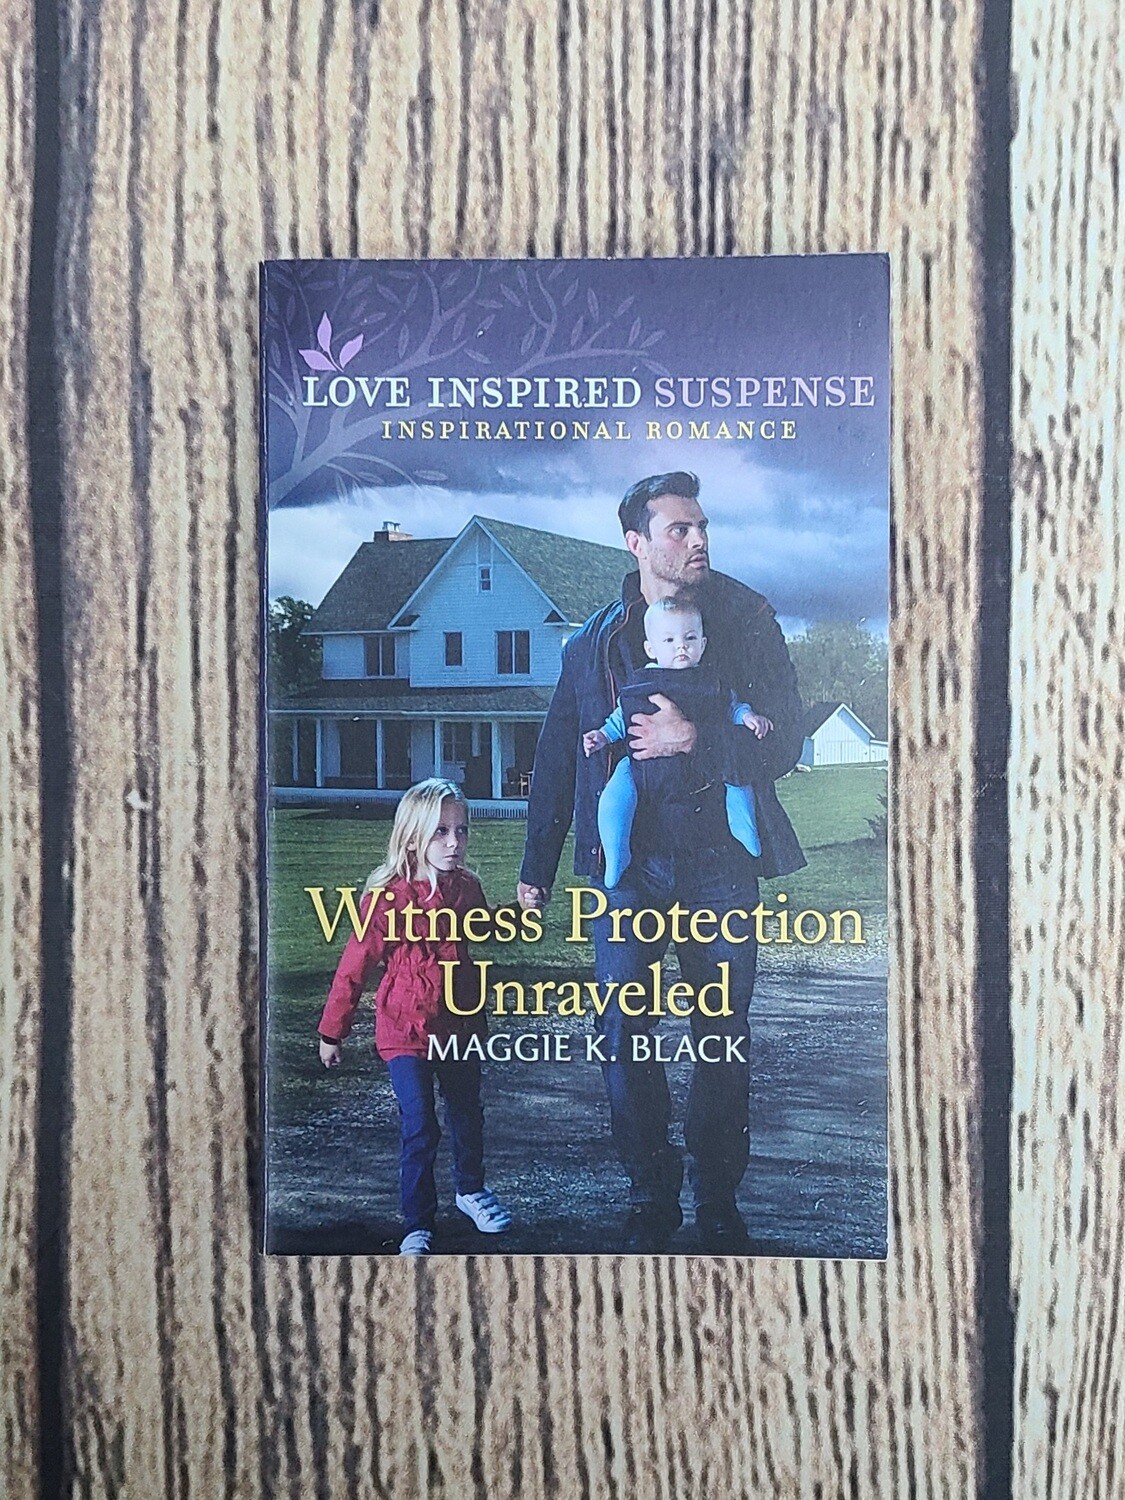 Witness Protection Unraveled by Maggie K. Black - Great Condition